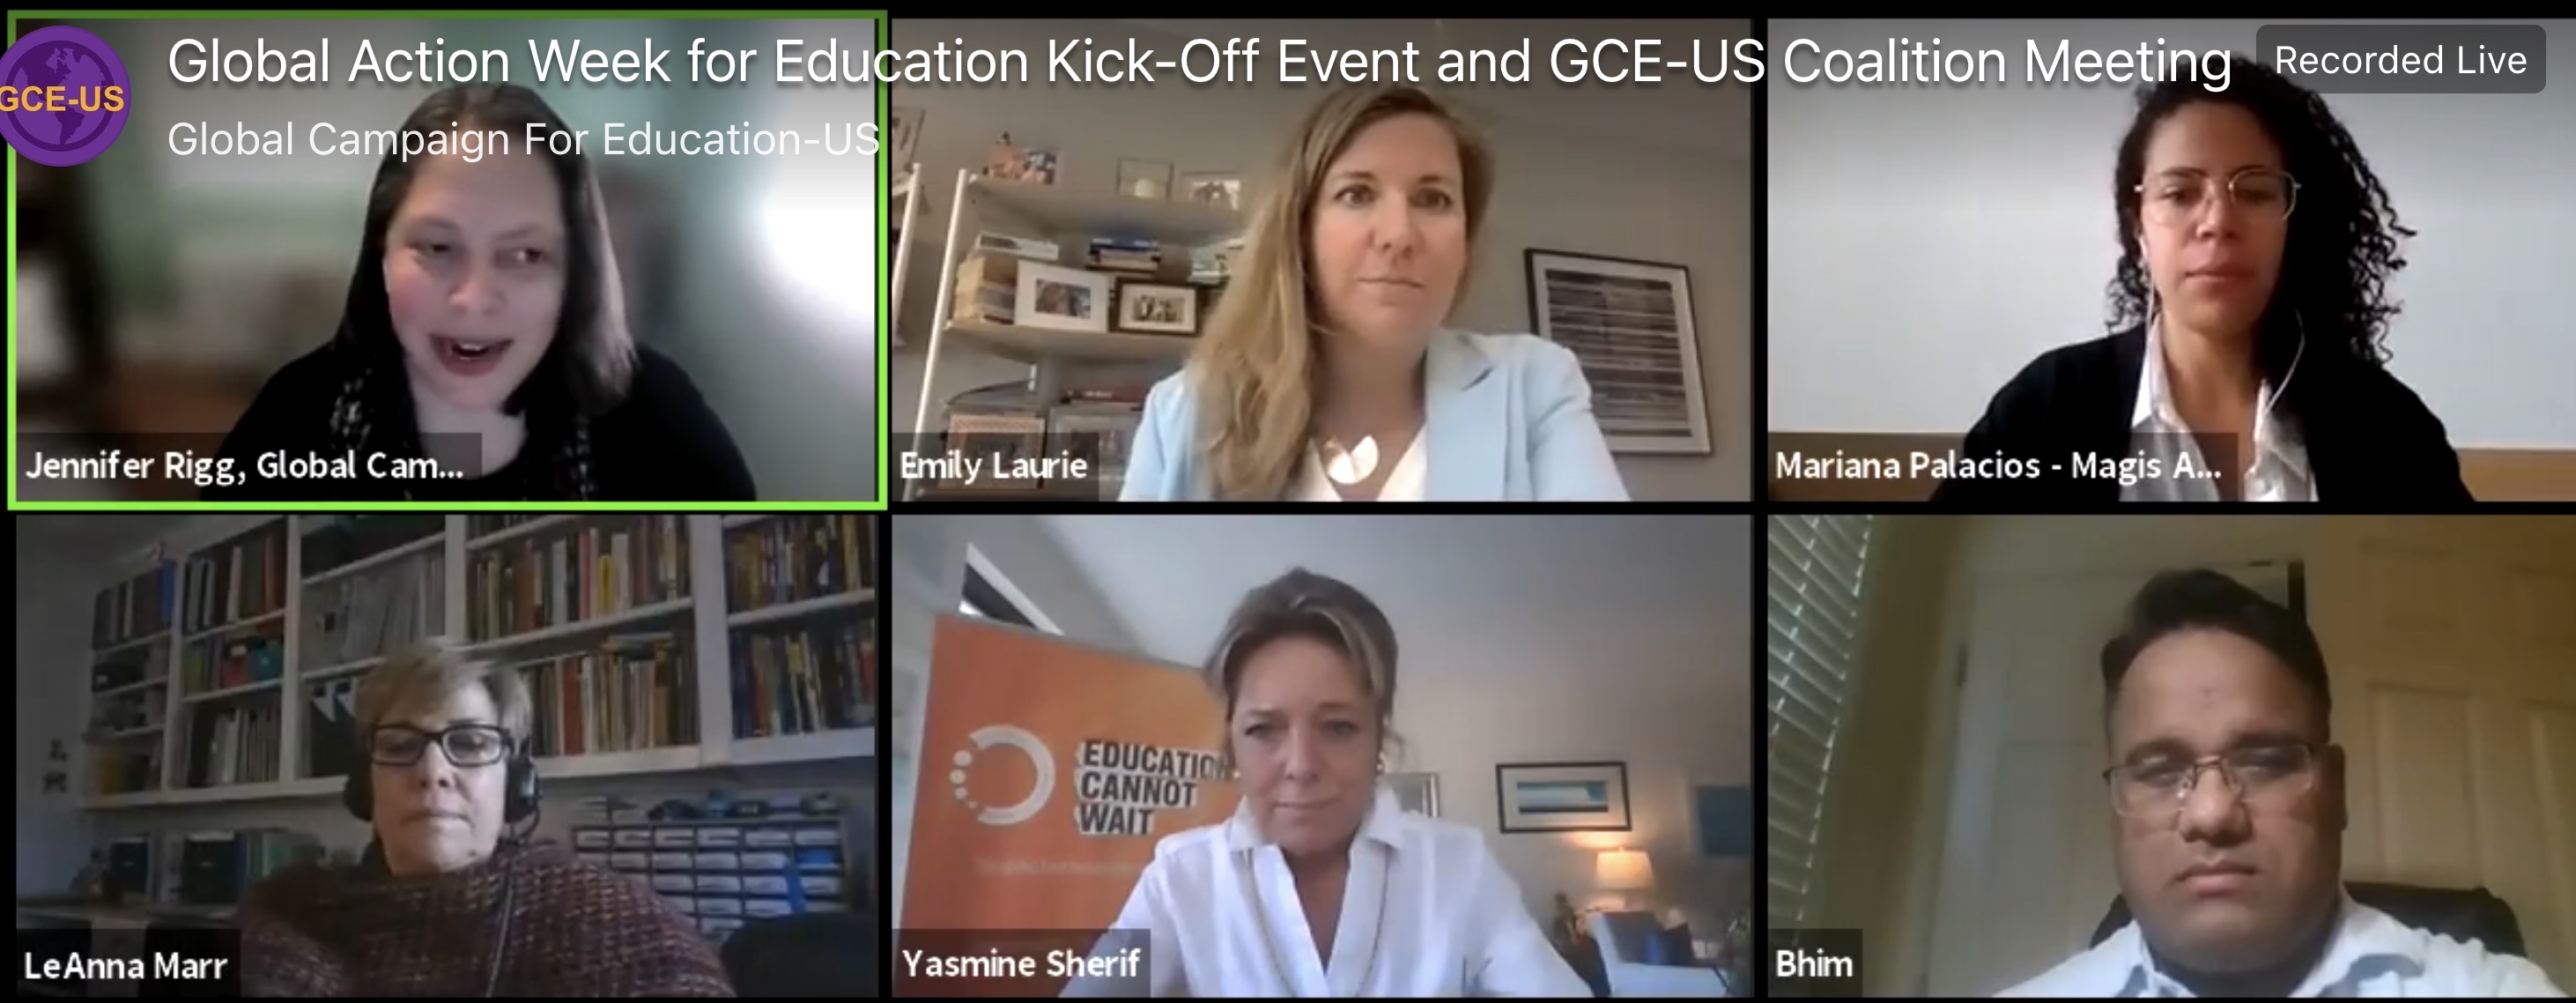 Global Action Week for Education GCE-US Kick-off Event